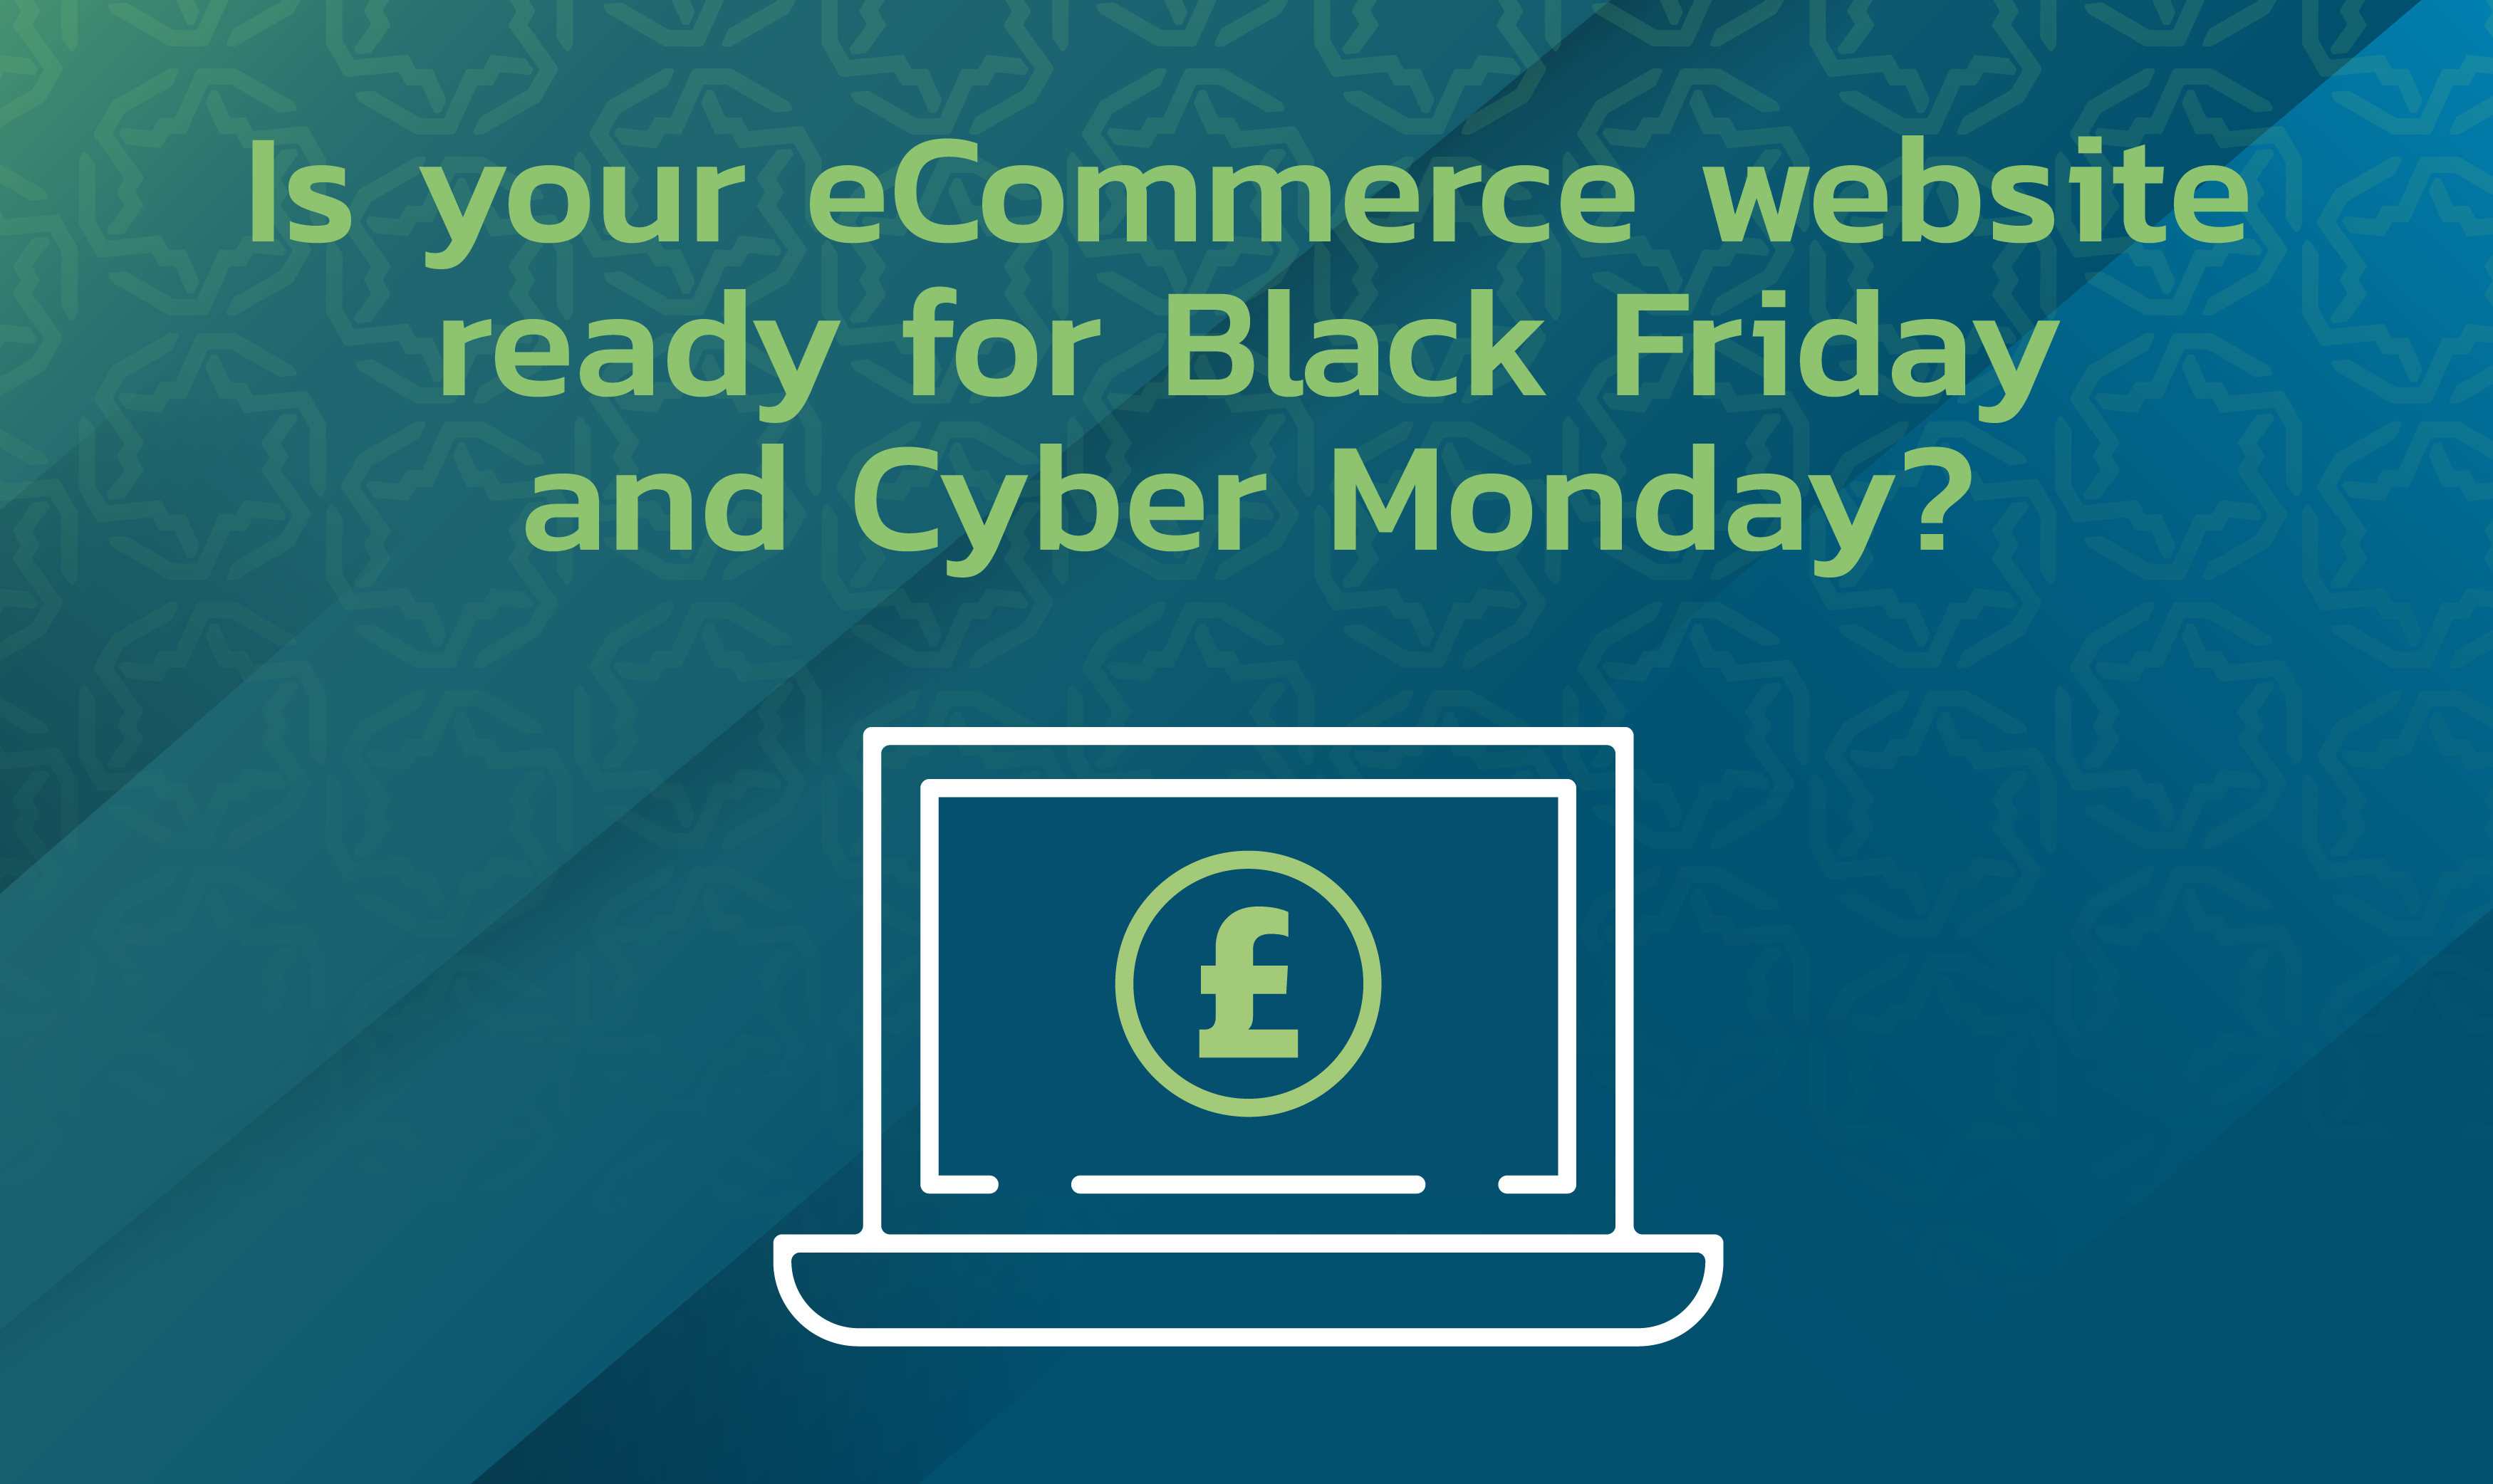 How to prepare your Ecommerce website for Black Friday and Cyber Monday